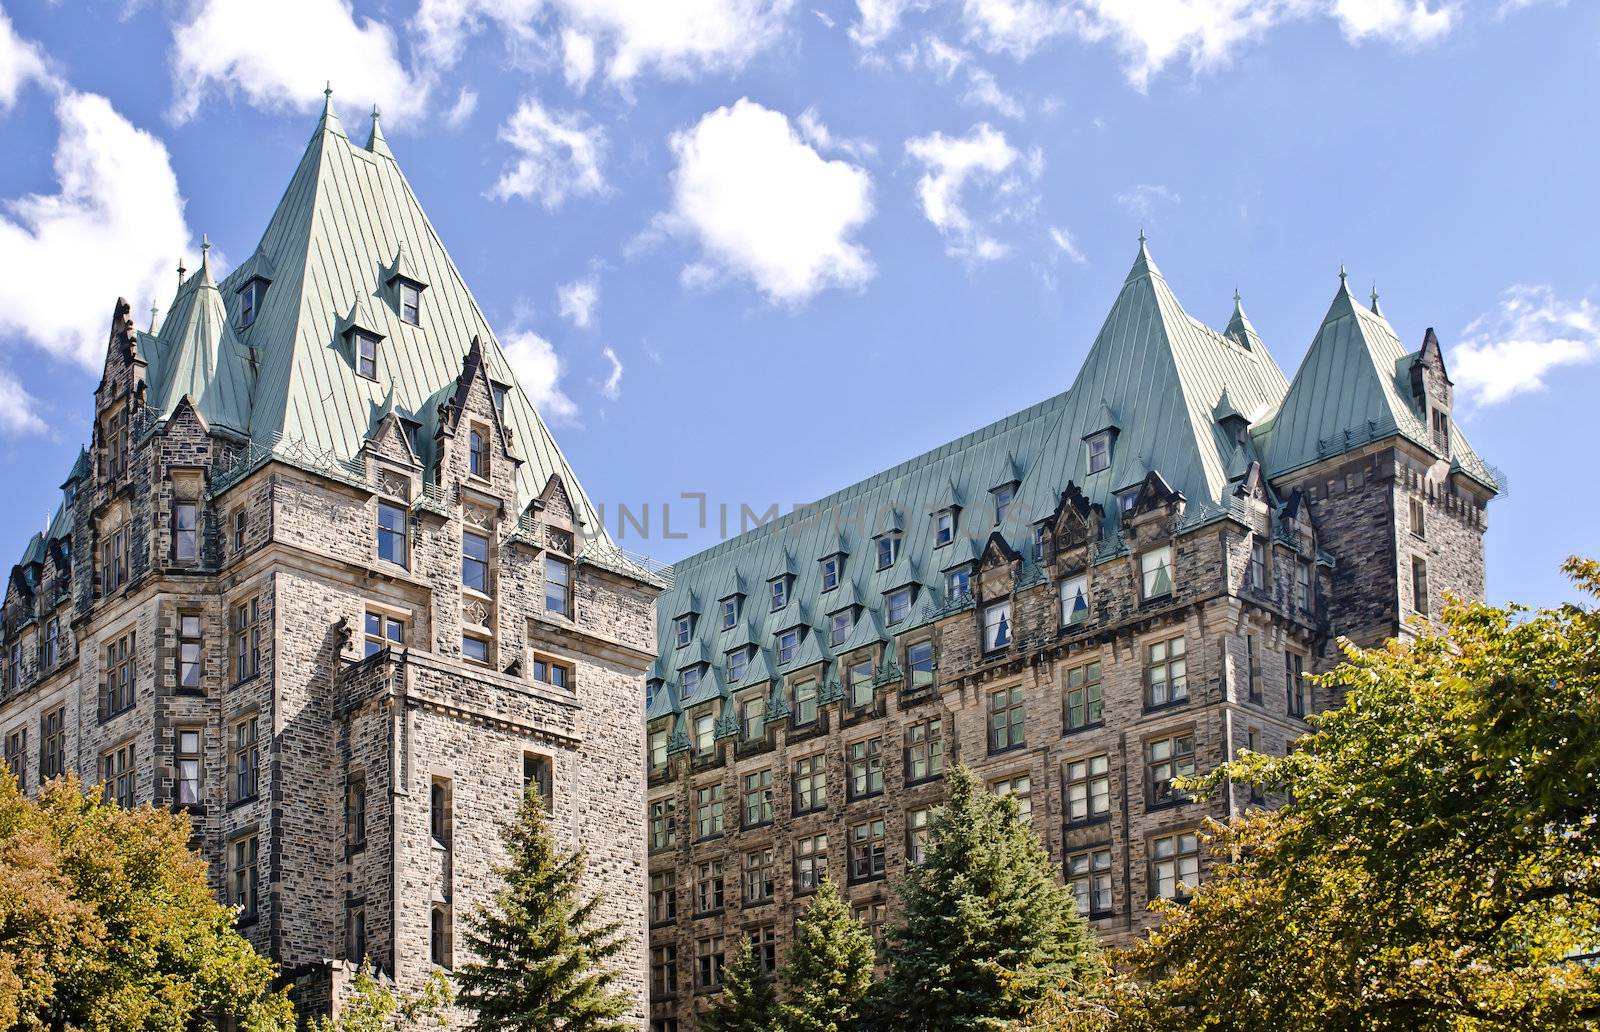 The Canadian Parliament Confederation Building seen from behind showing the 2 towers of offices for Members of Parliament in Ottawa, Canada.